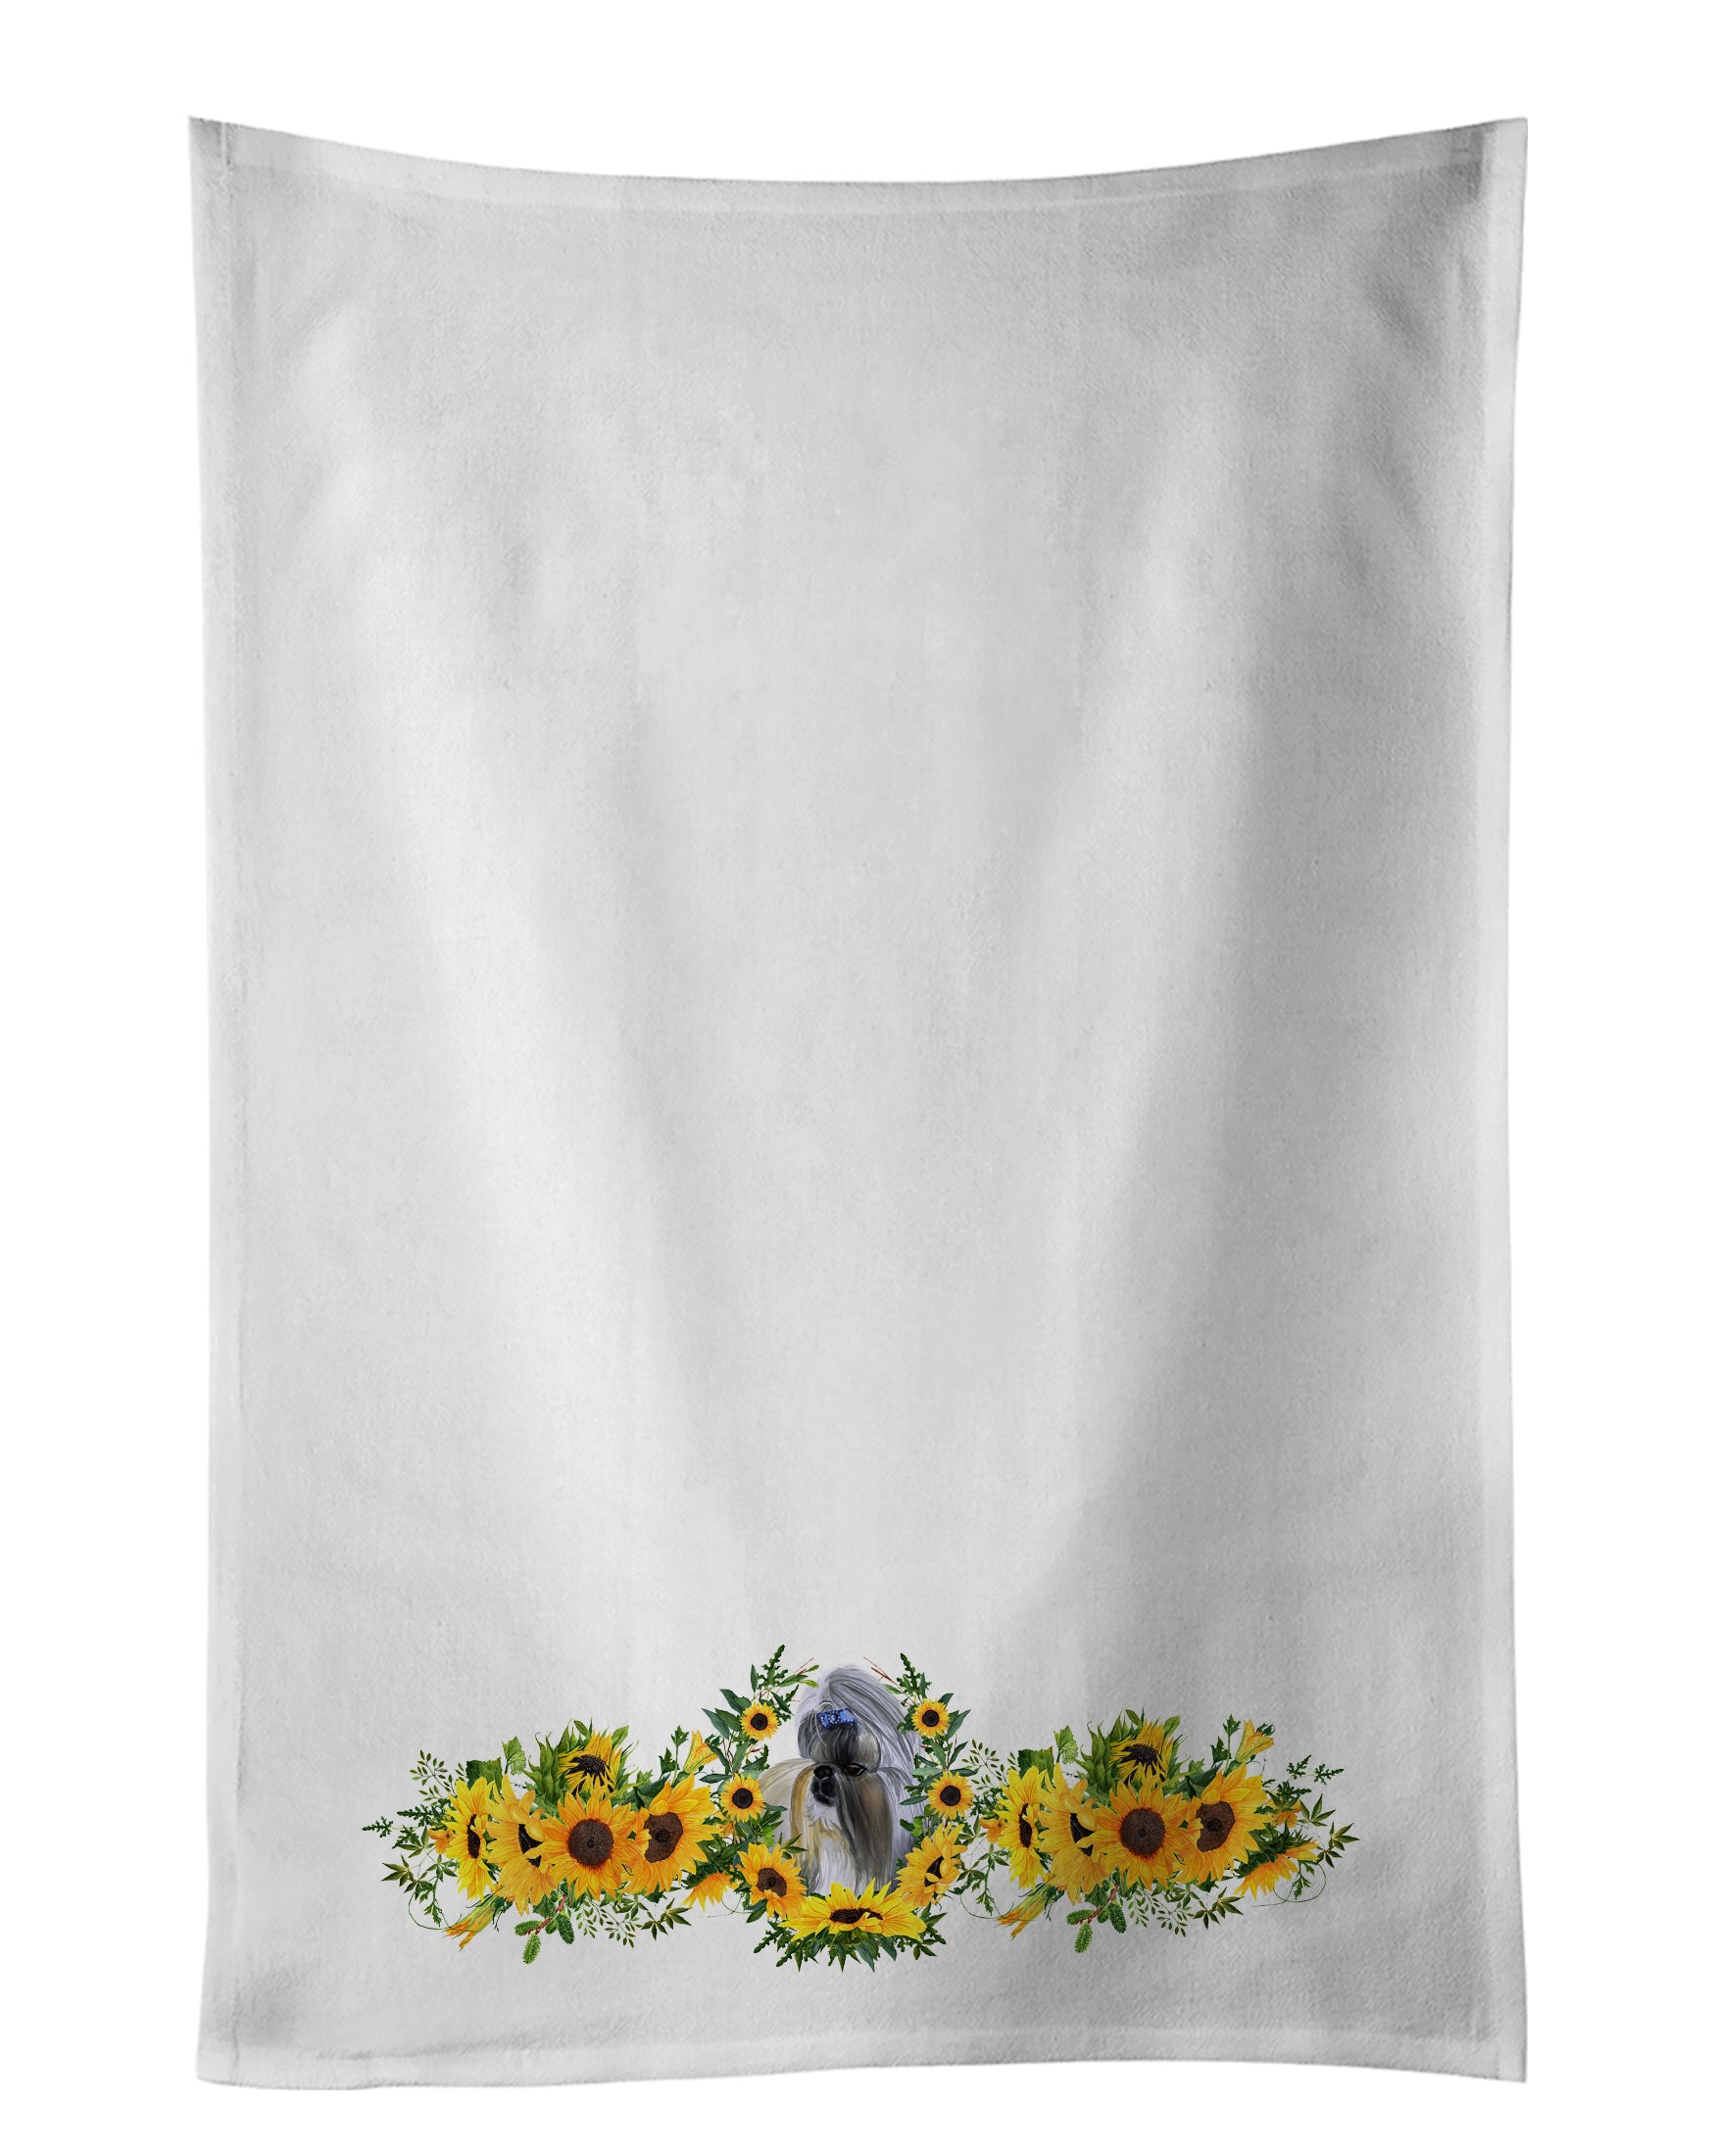 Buy this Shih Tzu in Sunflowers White Kitchen Towel Set of 2